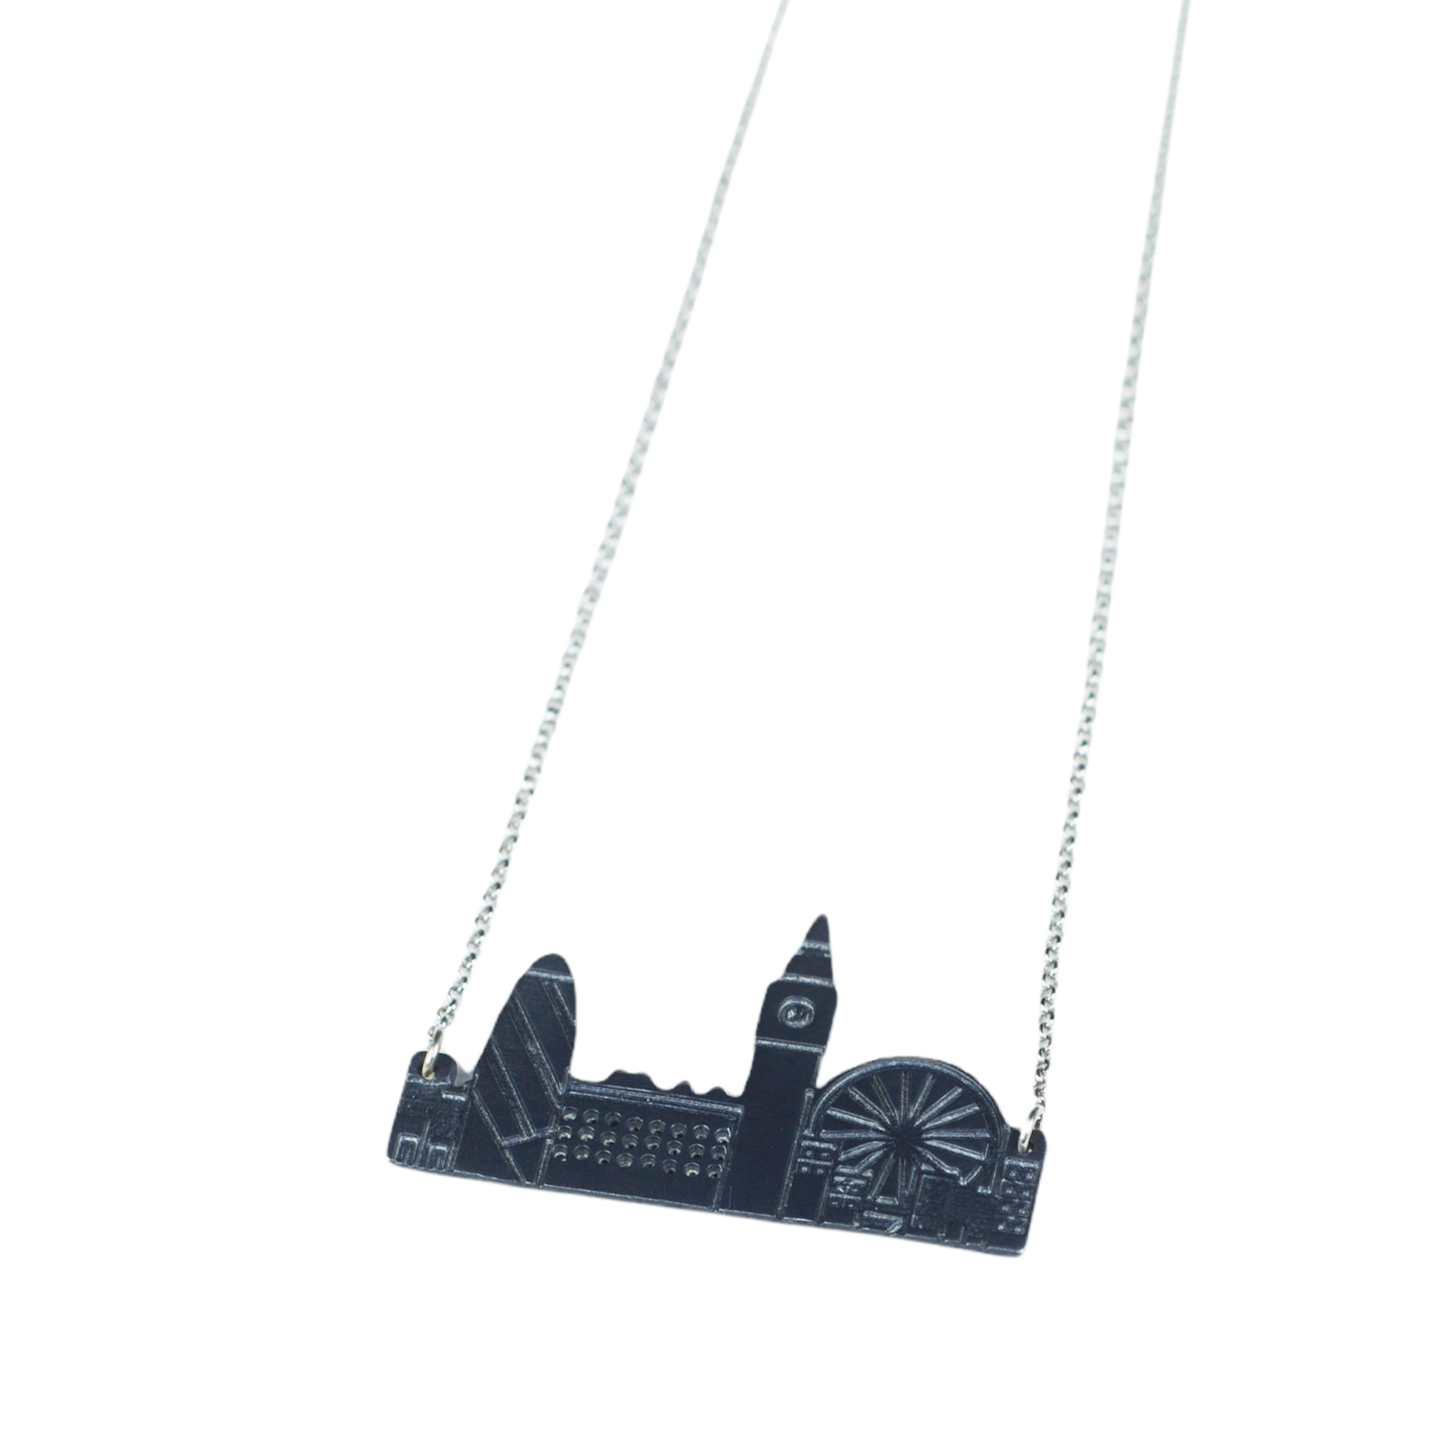 London Chain Necklace S